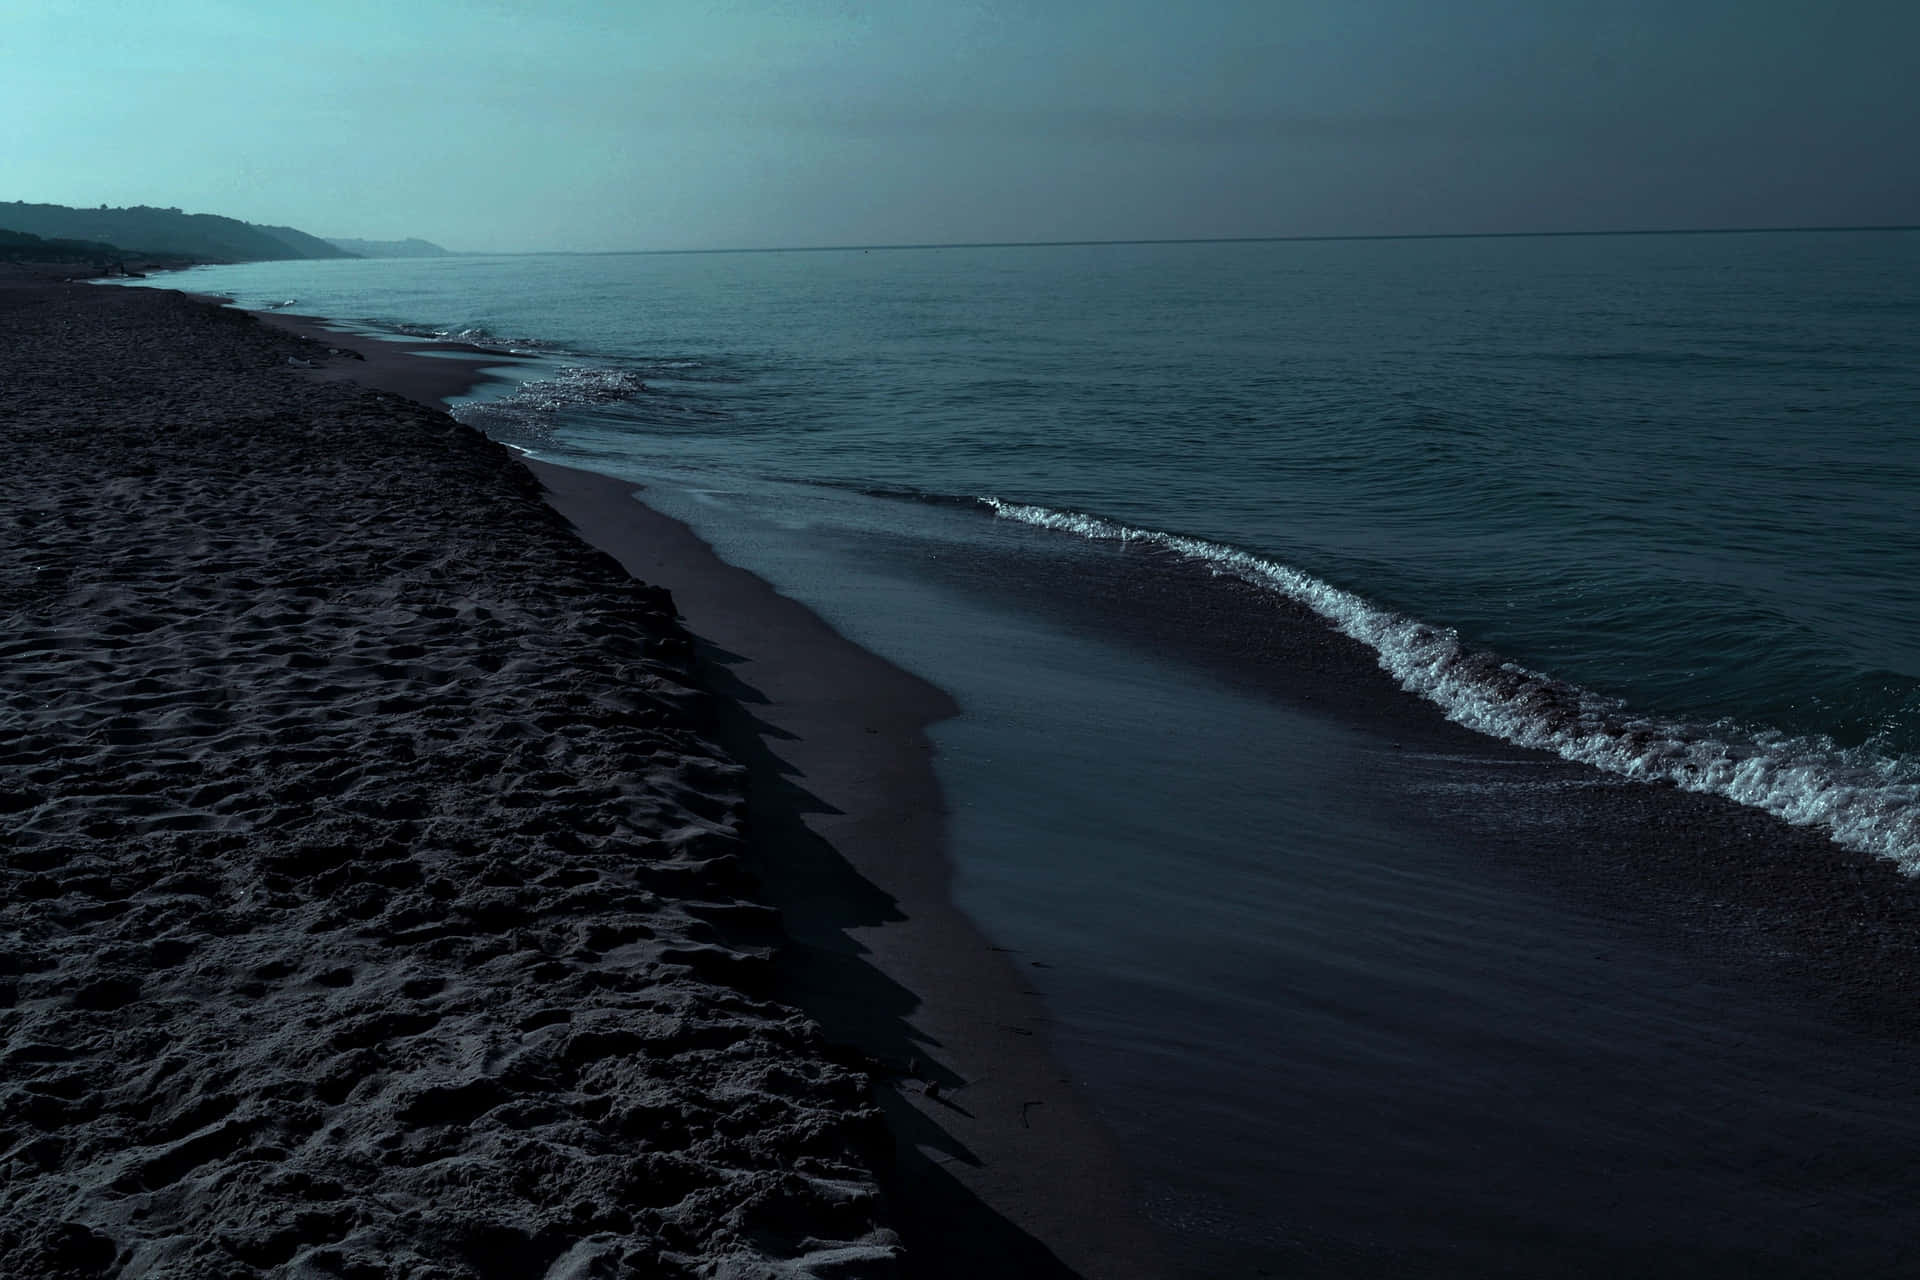 Soaking in the view of the mesmerizing Black Sand Beach. Wallpaper